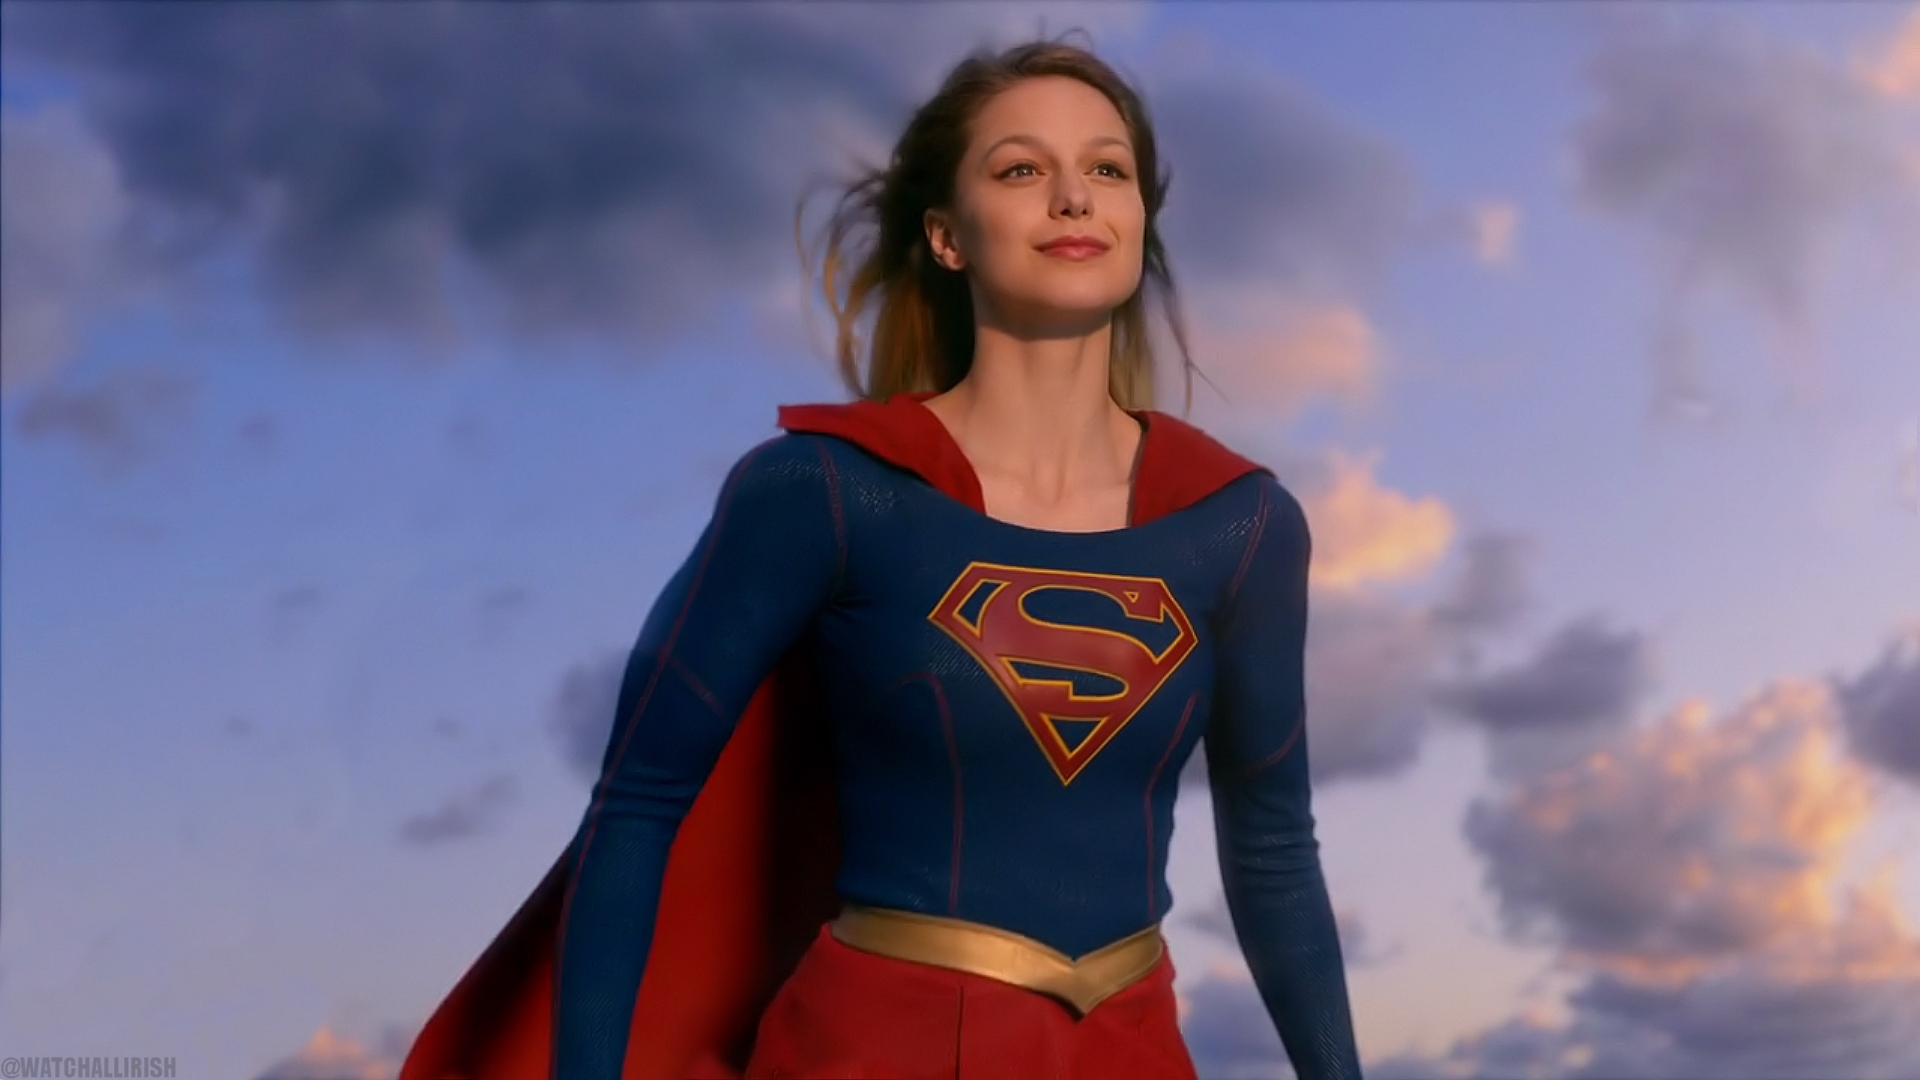 Wallpaper Movies Tv Watchall Supergirl Series Add A